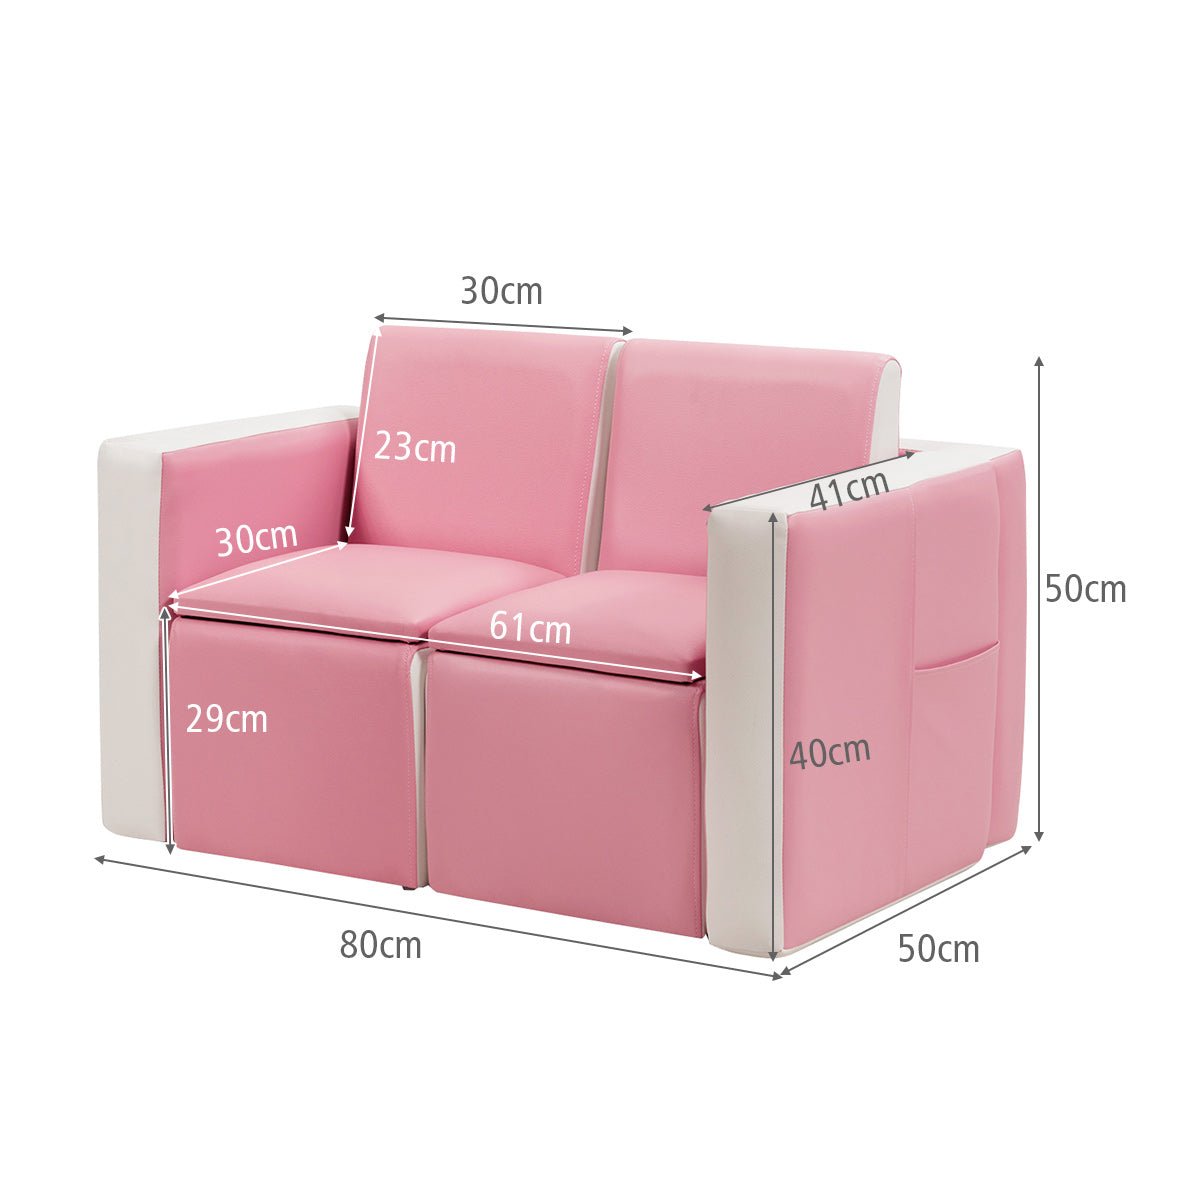 Kids Sofa with Wooden Frame and Storage - Cozy, Stylish, and Smart